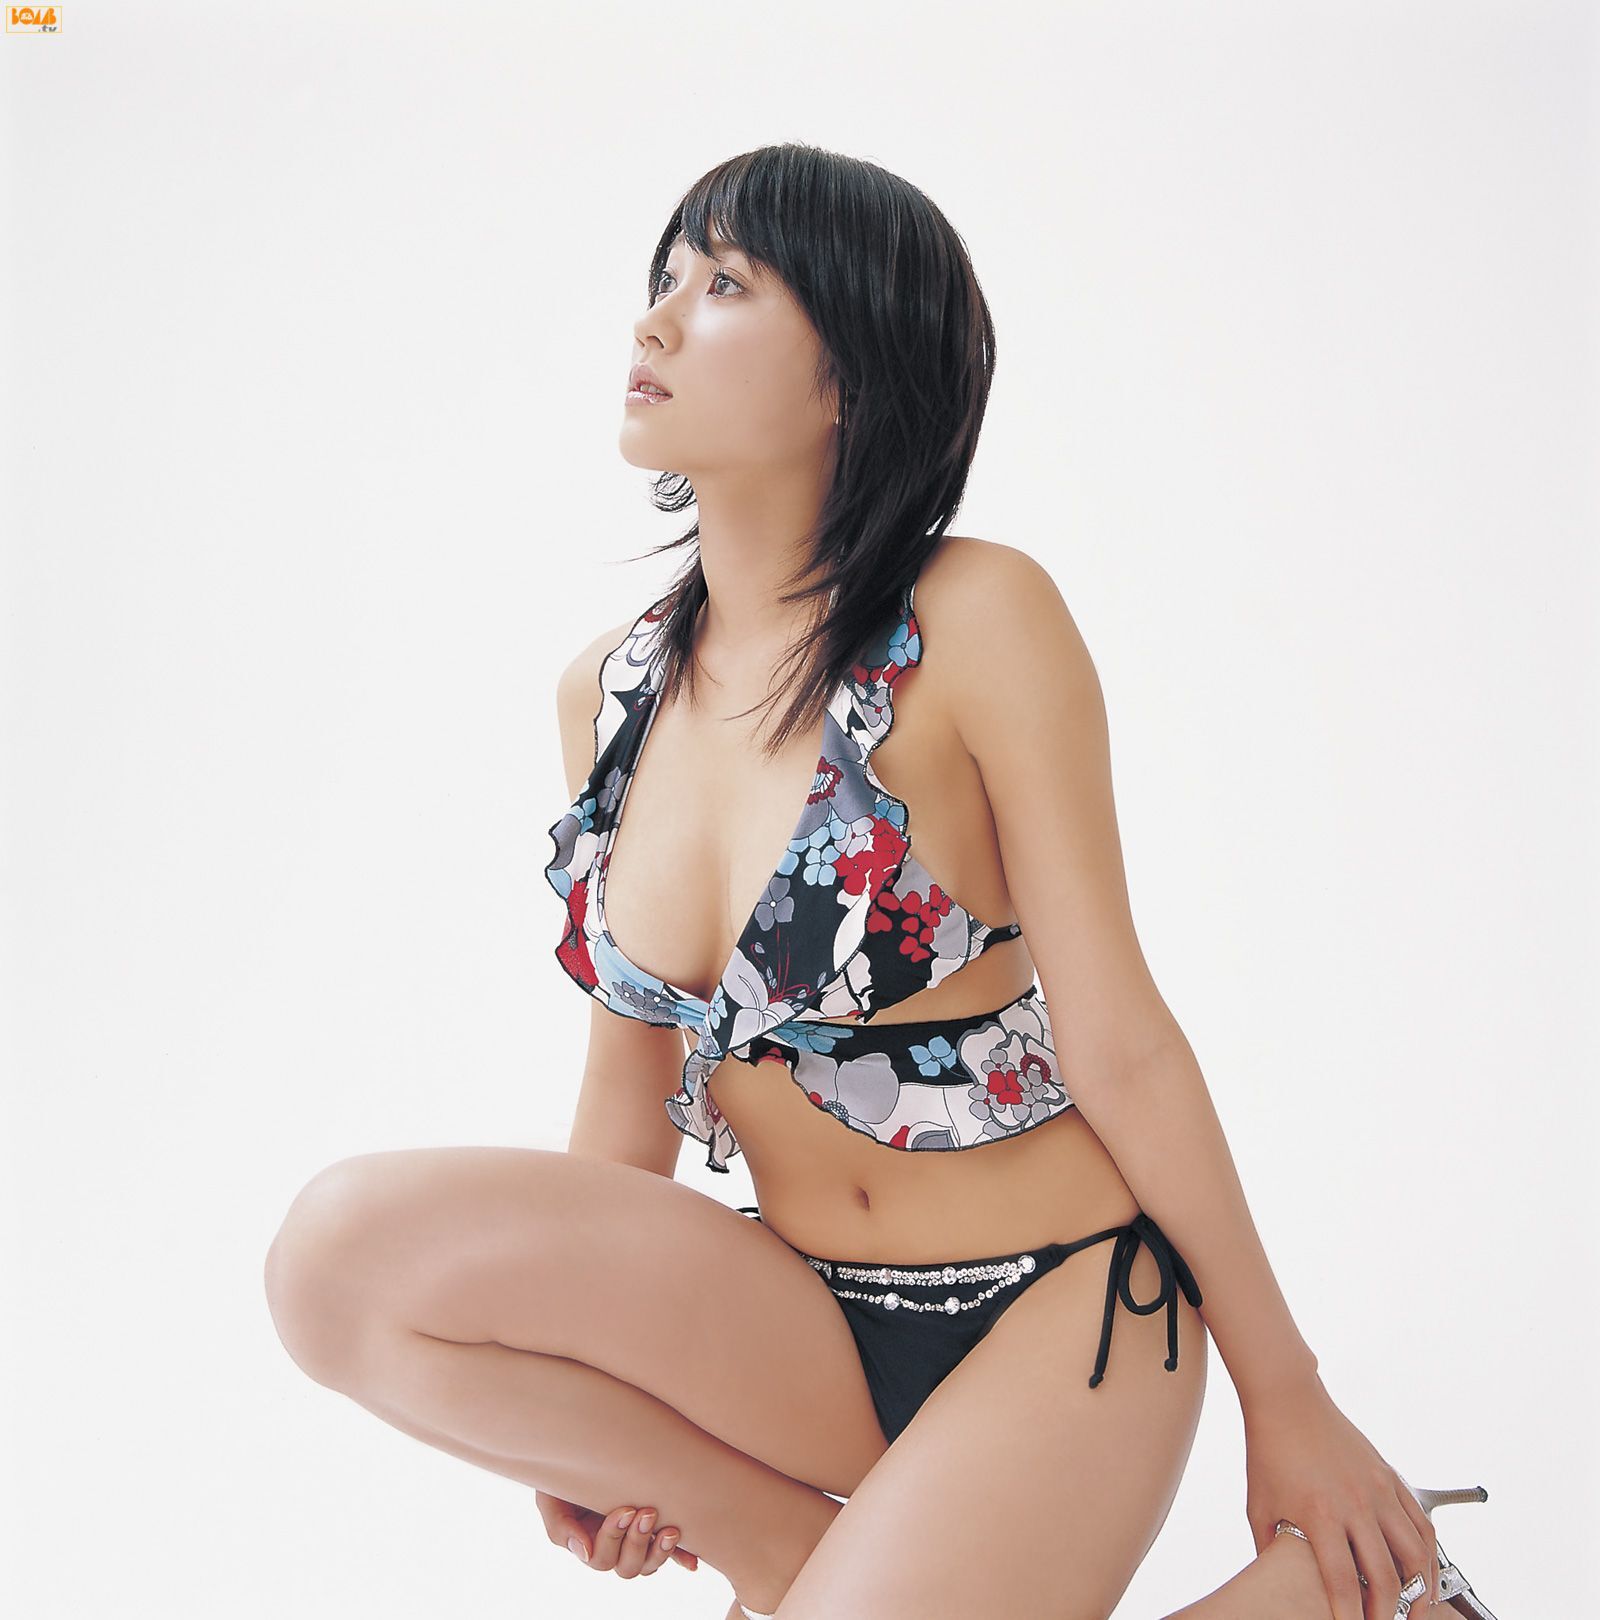 Mikie Hara Bomb.tv Classic beauty picture Japan mm